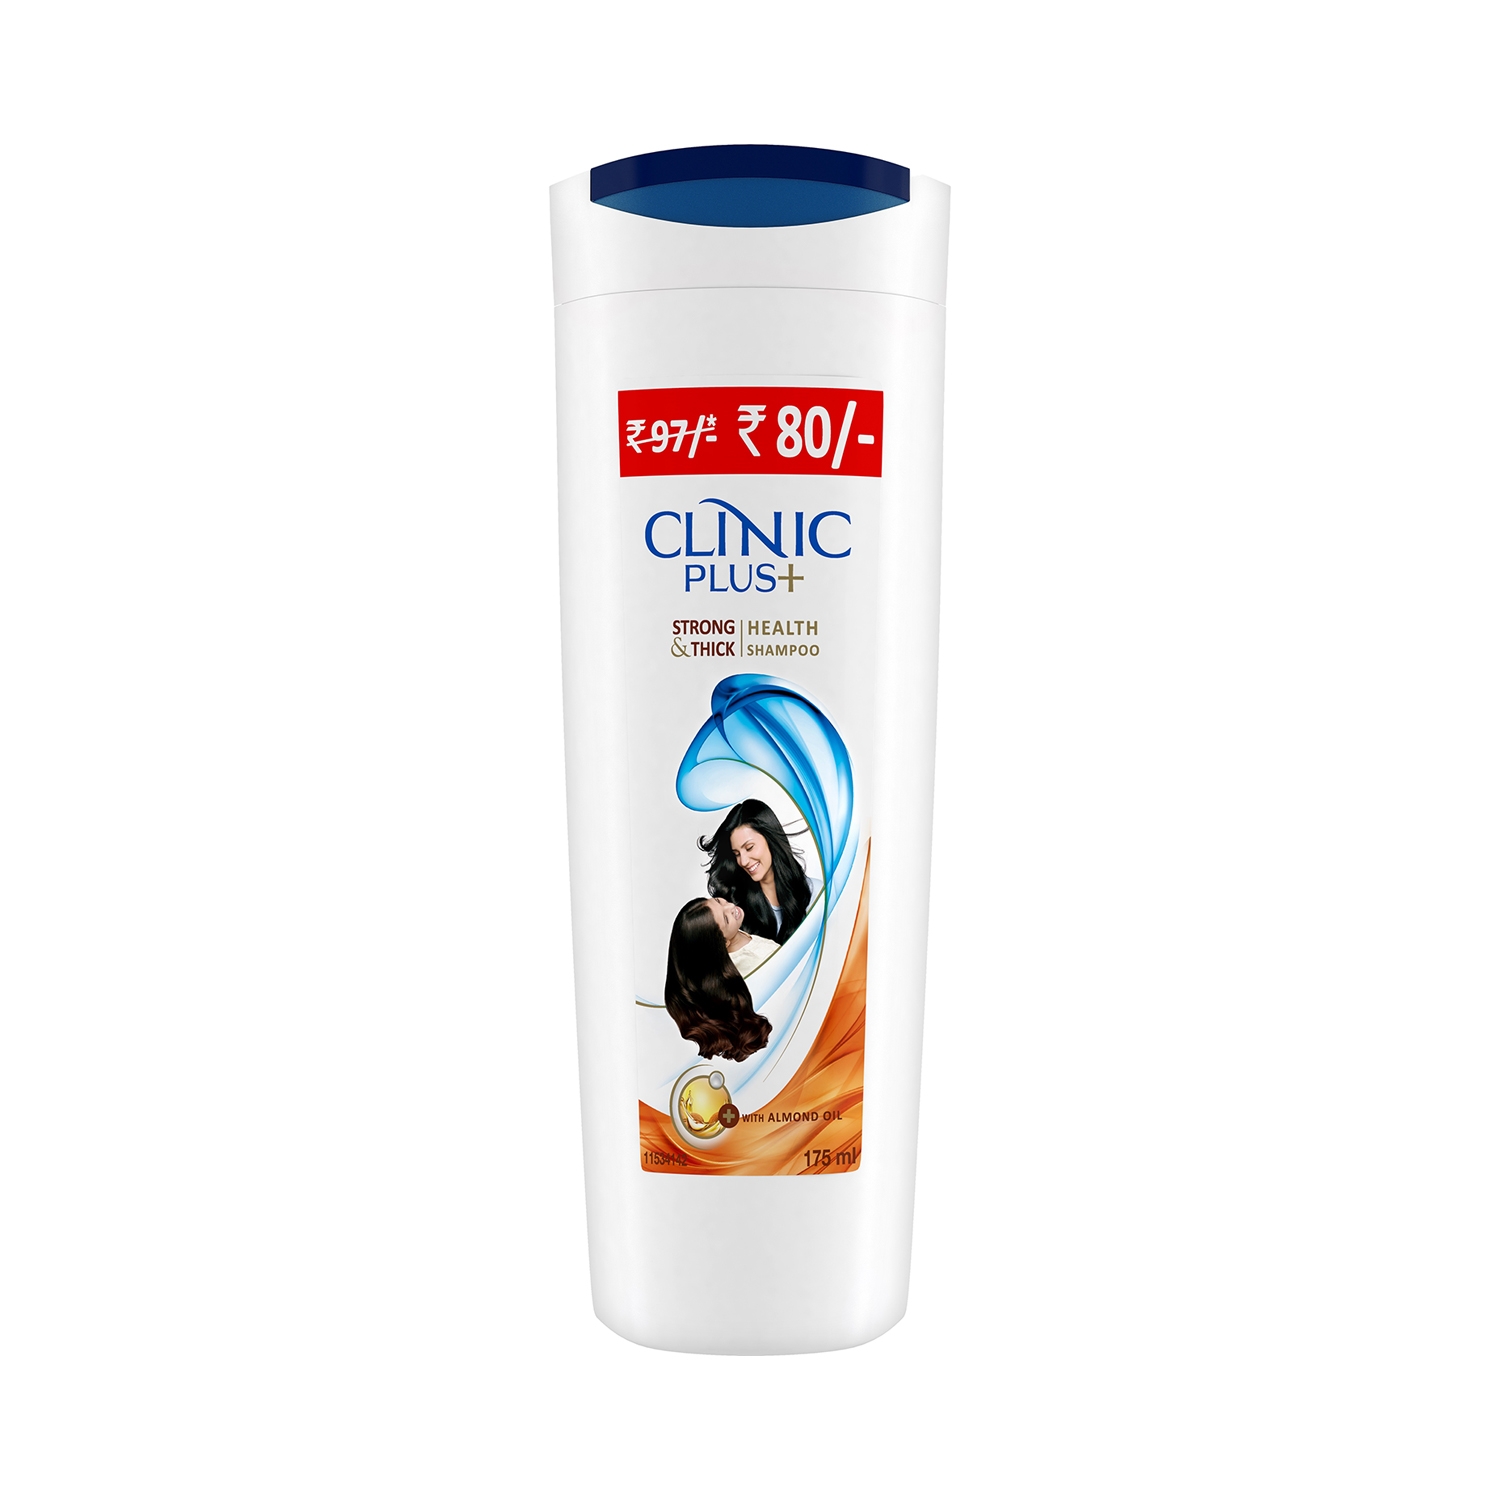 Clinic Plus Strong & Thick Shampoo (175ml)